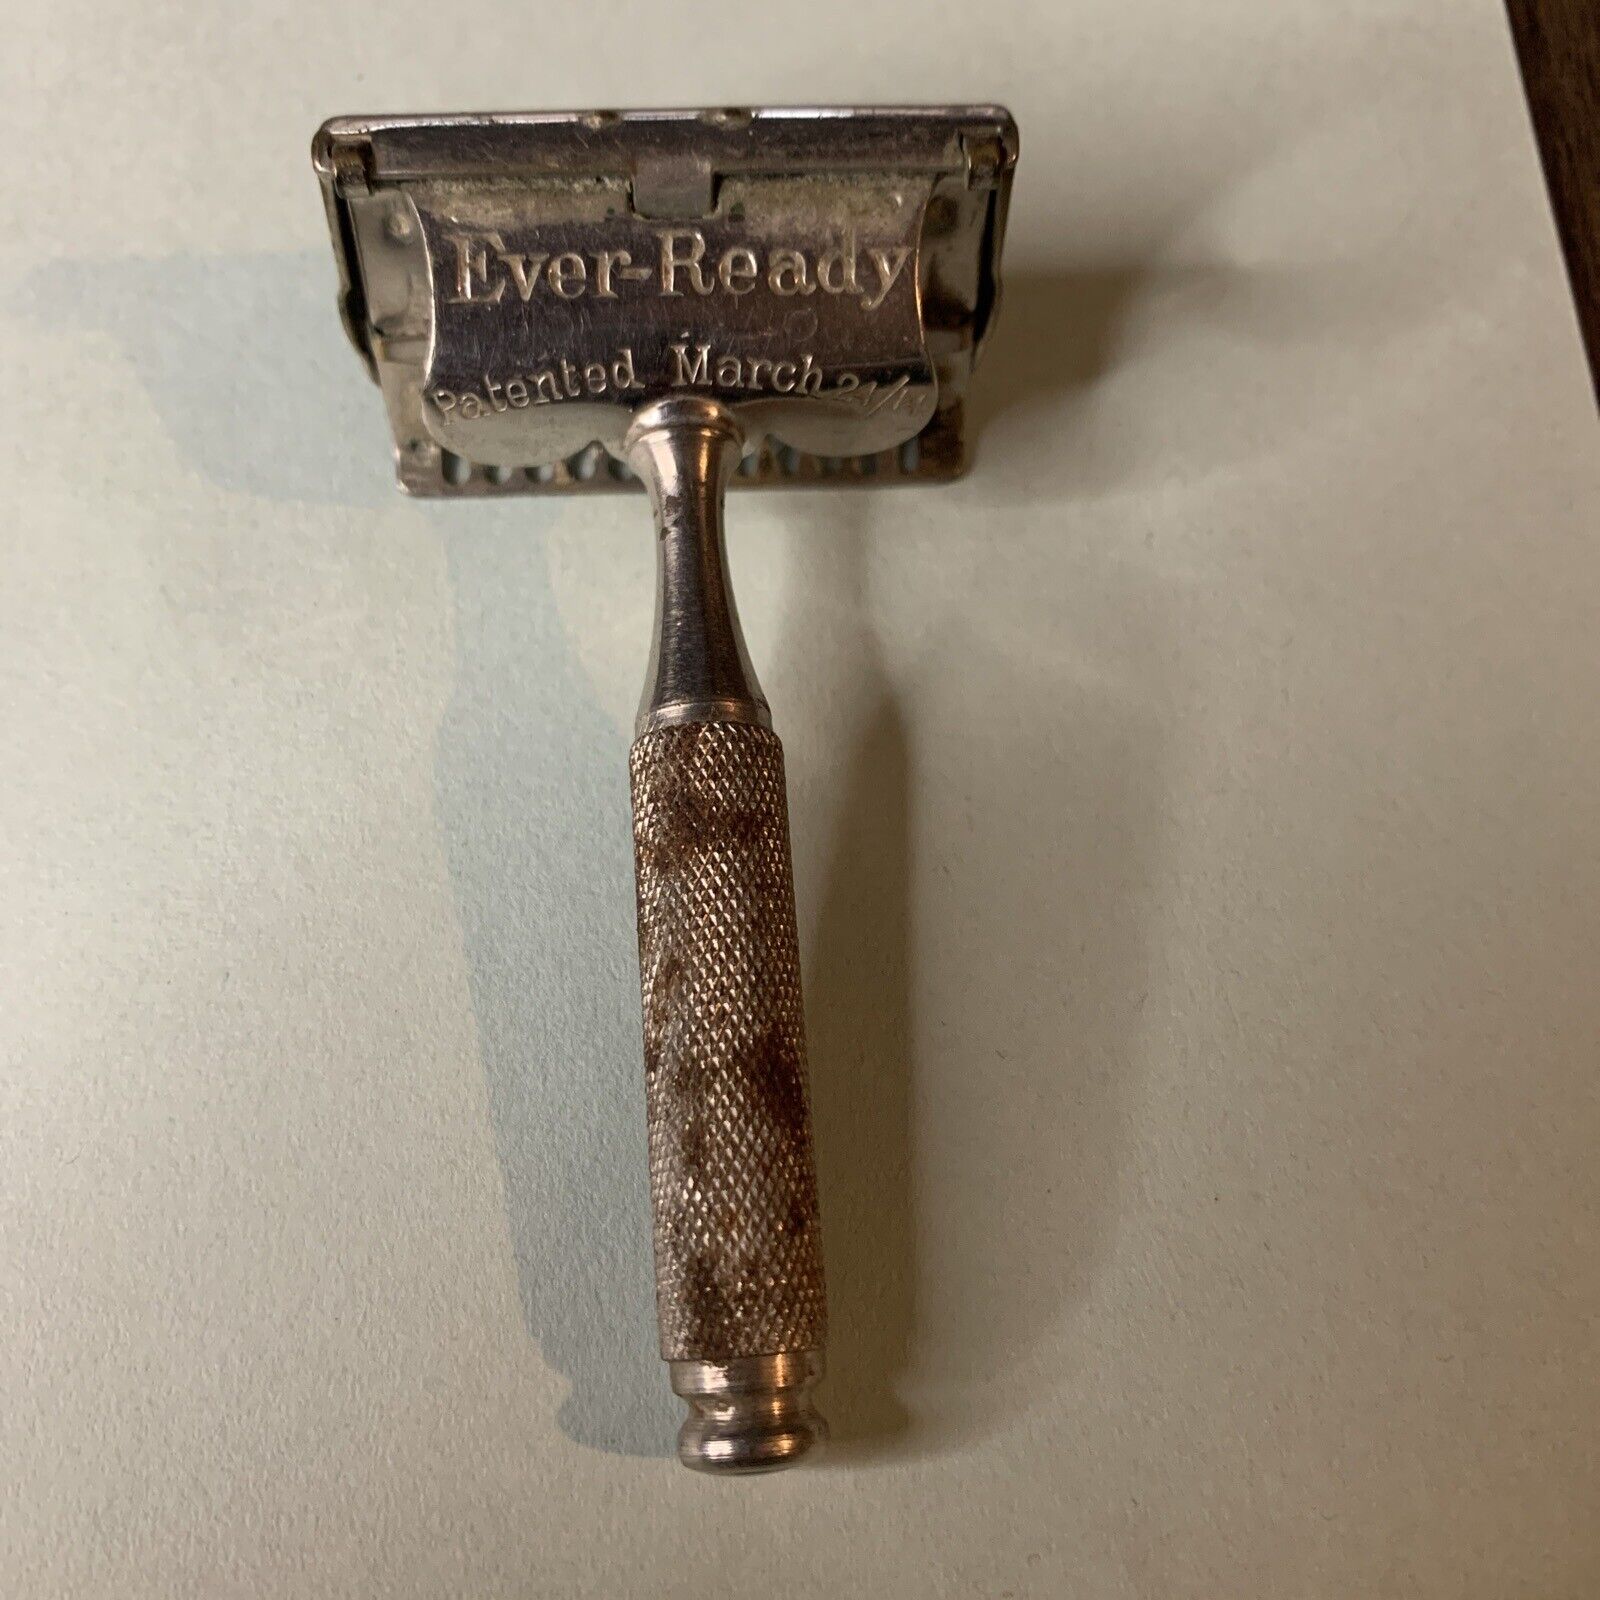 Vintage Ever-Ready Safety Razor Short Knurled Handle Patented March 24 1914